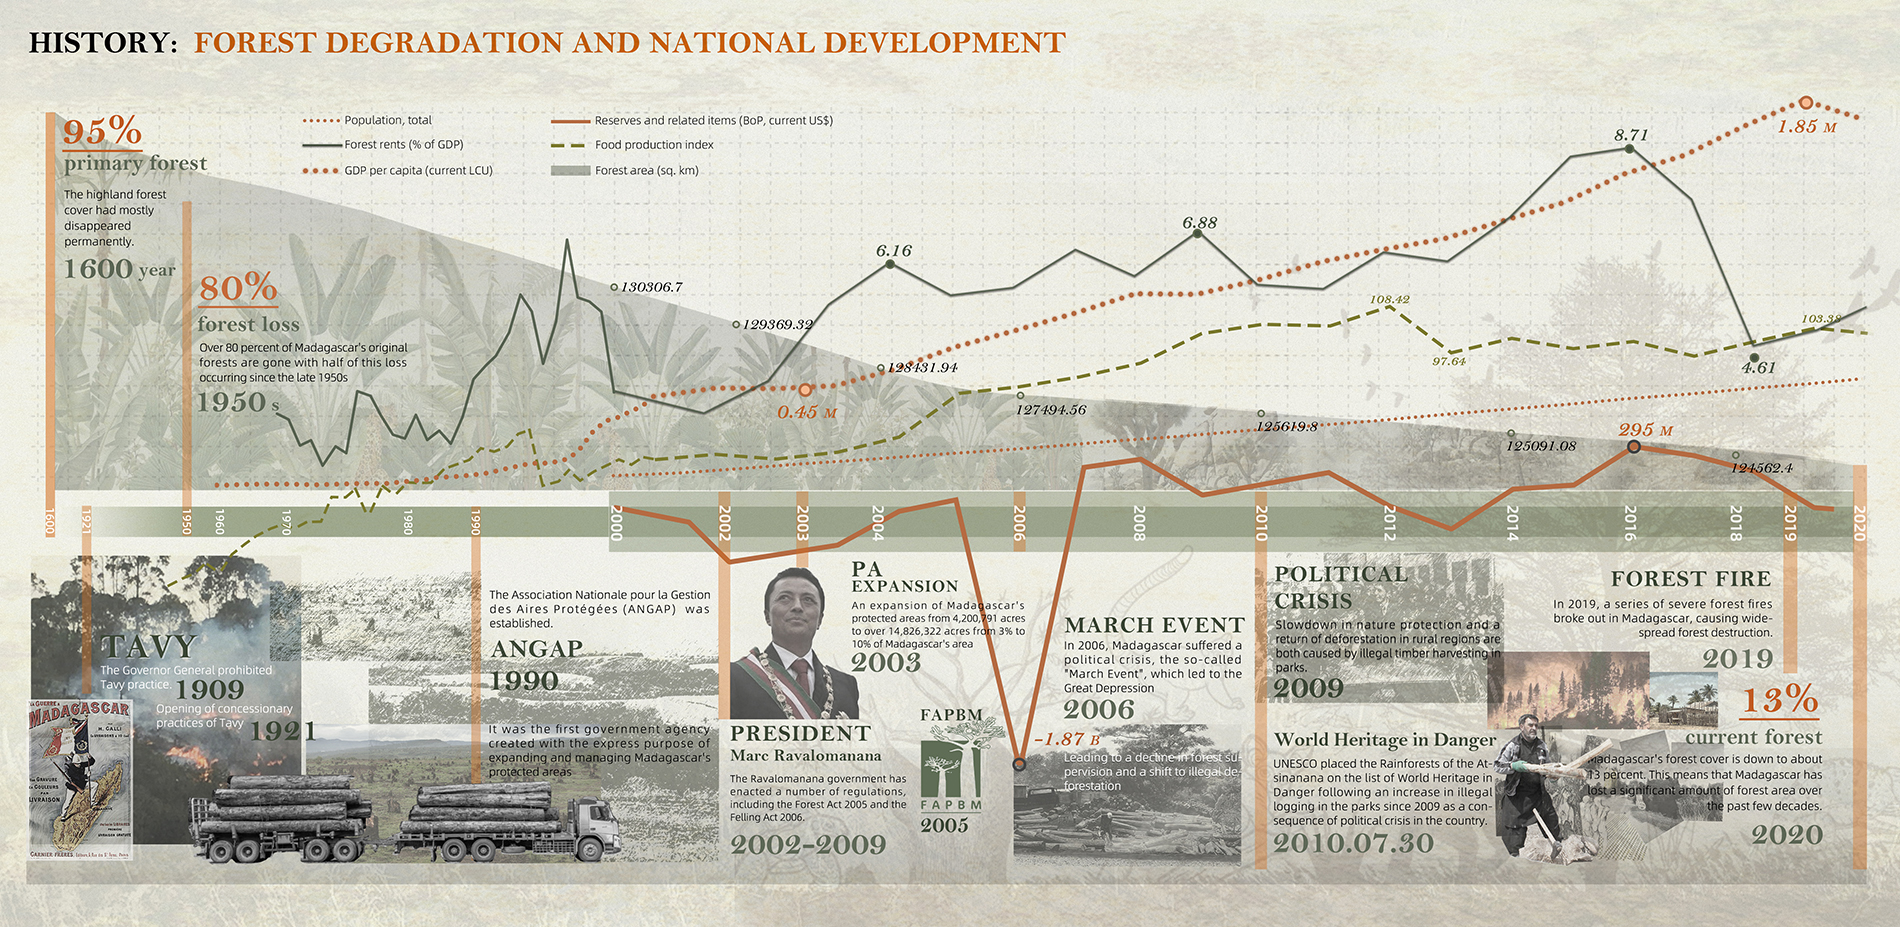 History: Forest Degradation and National Development